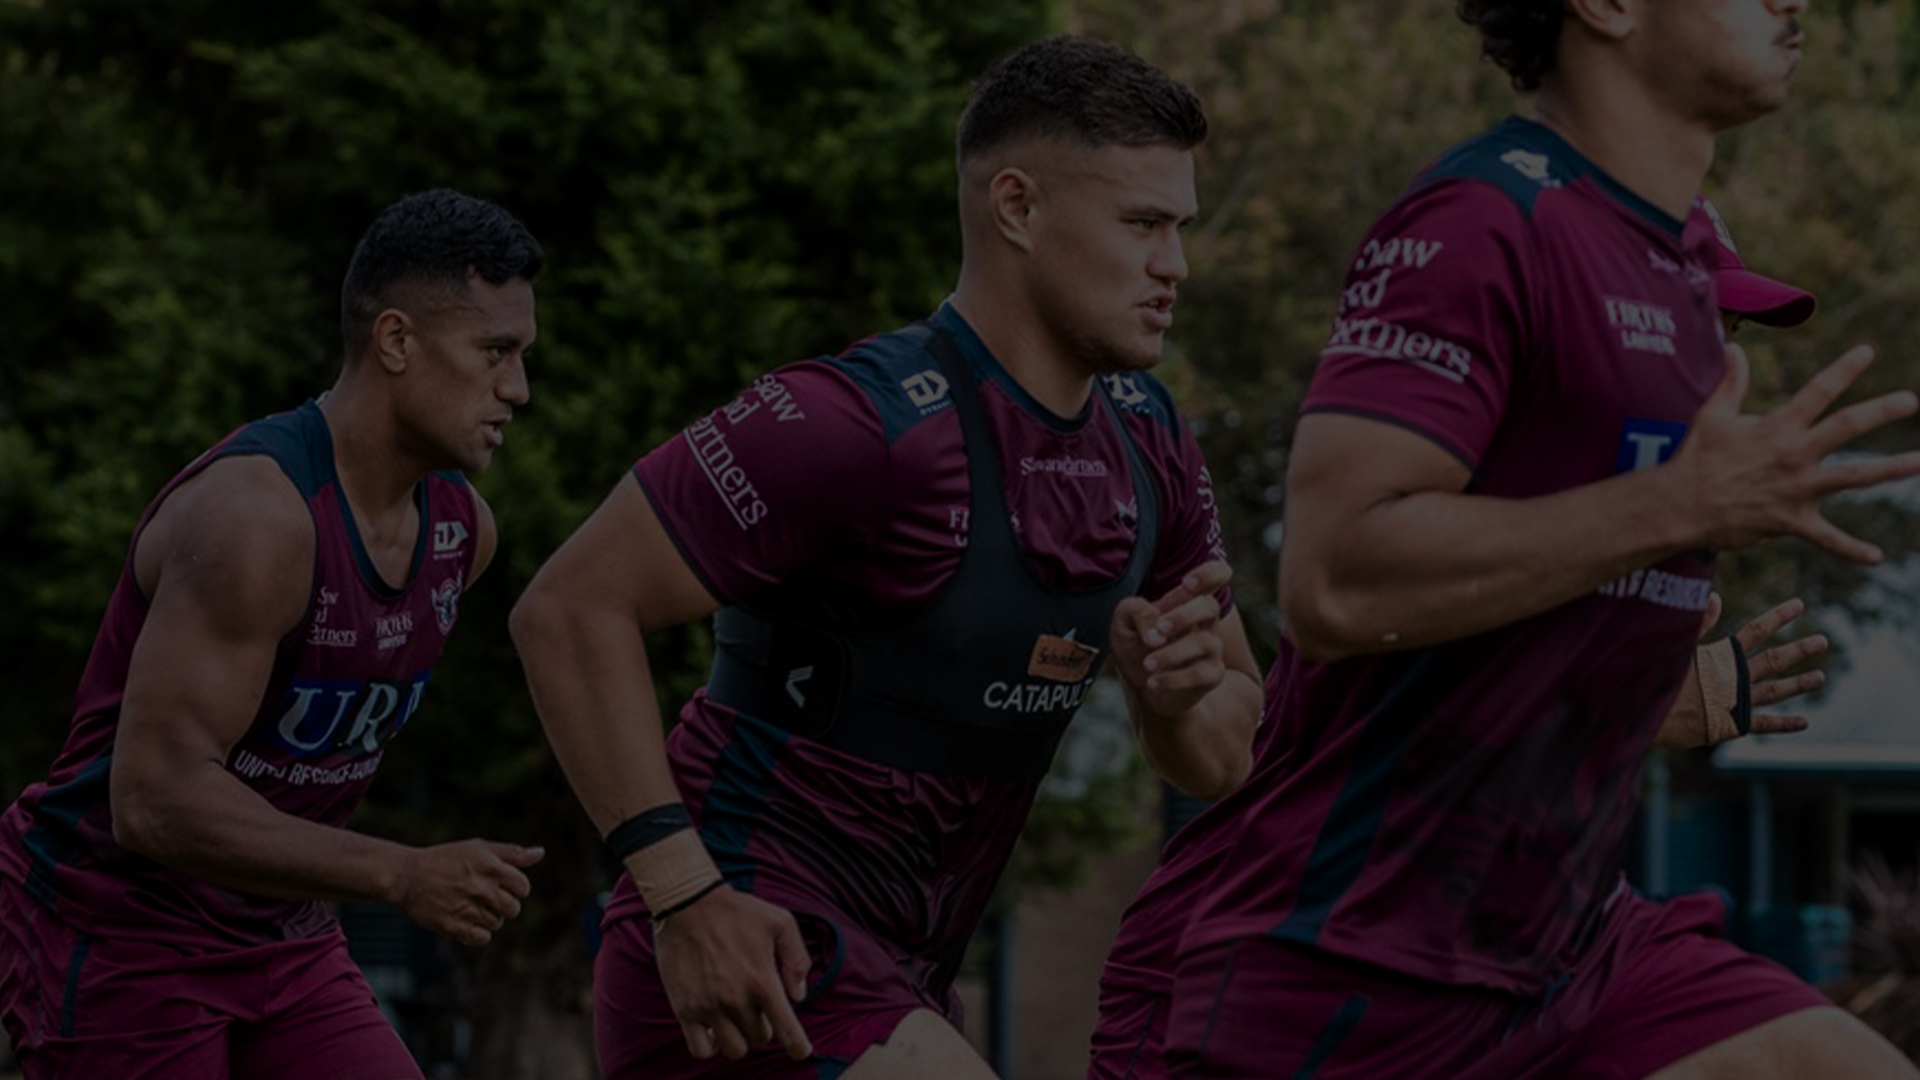 A cohort of NRL players is captured in the midst of an intense outdoor training exercise. They are clad in varying shades of purple jerseys and deep blue shorts, emphasising teamwork and strategic play.